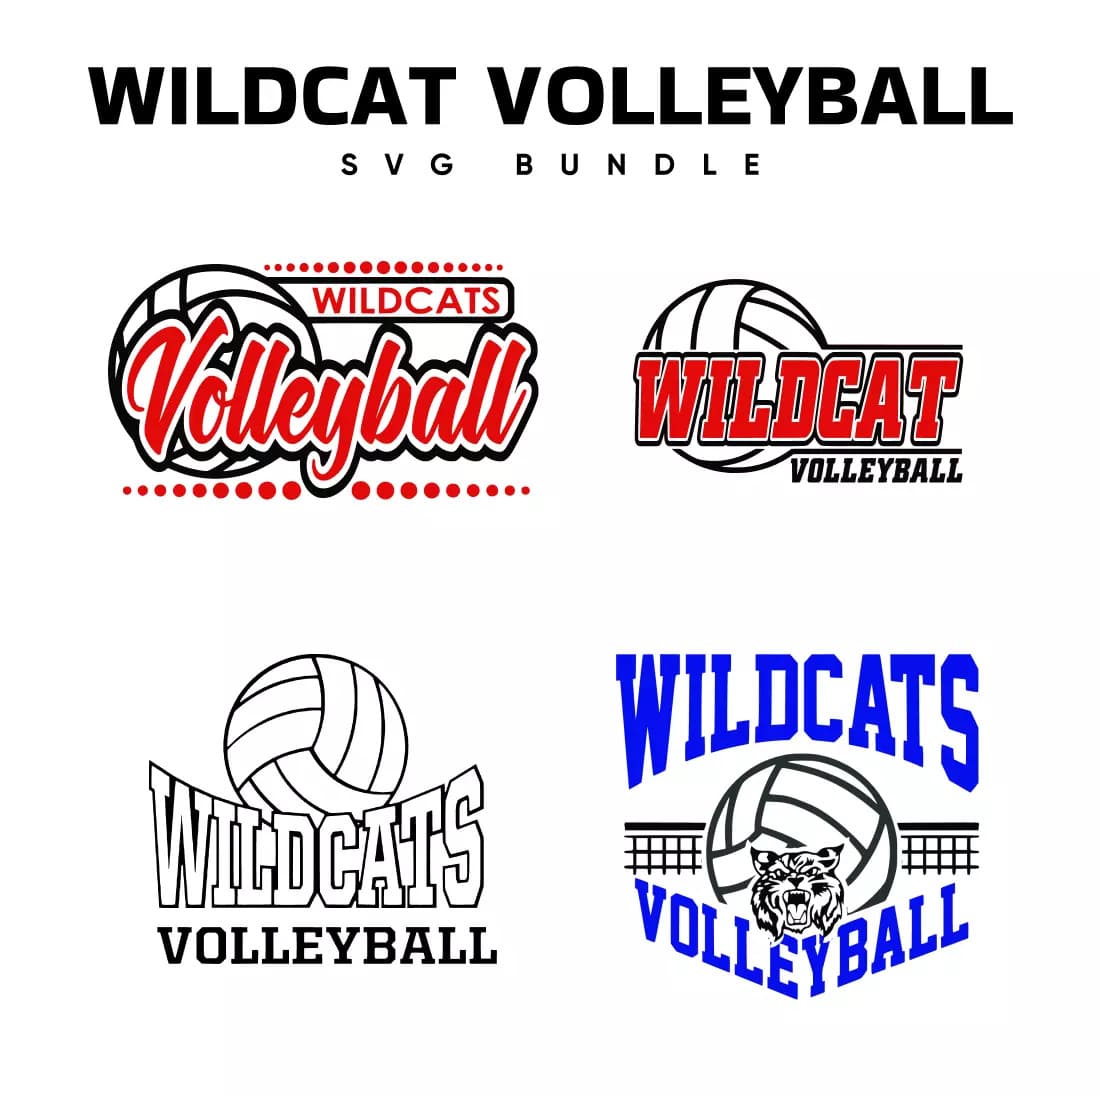 The wildcat volleyball logo is shown in four different colors.